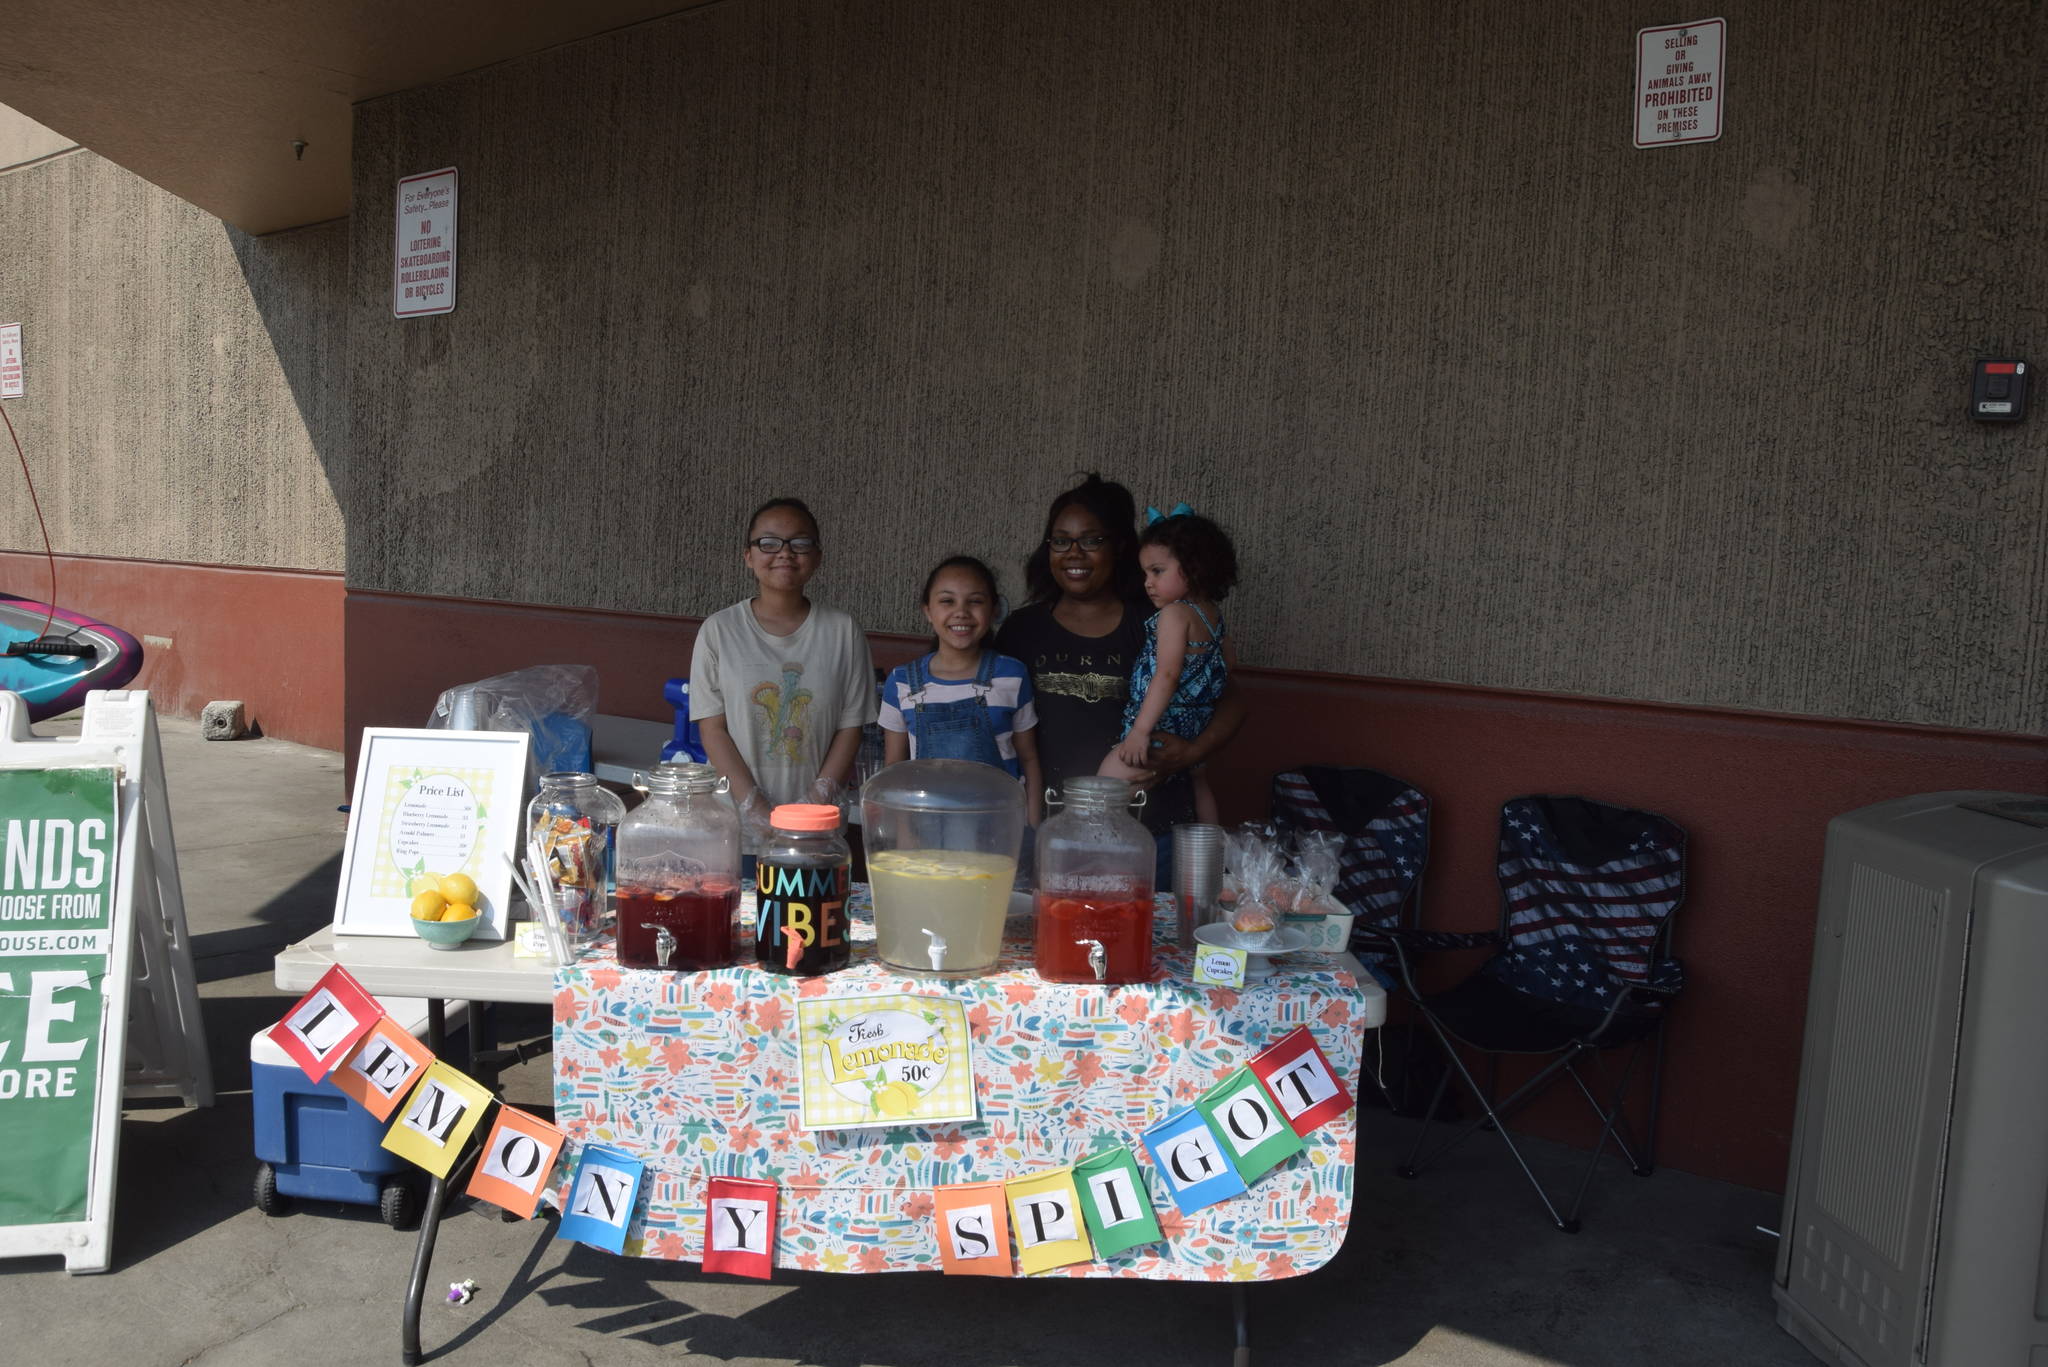 From left, Addison, Isabella, Bri and Emma Havrilla smile for the camera at their lemonade stand outside of Sportsman’s Warehouse during Lemonade Day in Soldotna, Alaska on June 29, 2019. (Photo by Brian Mazurek/Peninsula Clarion)